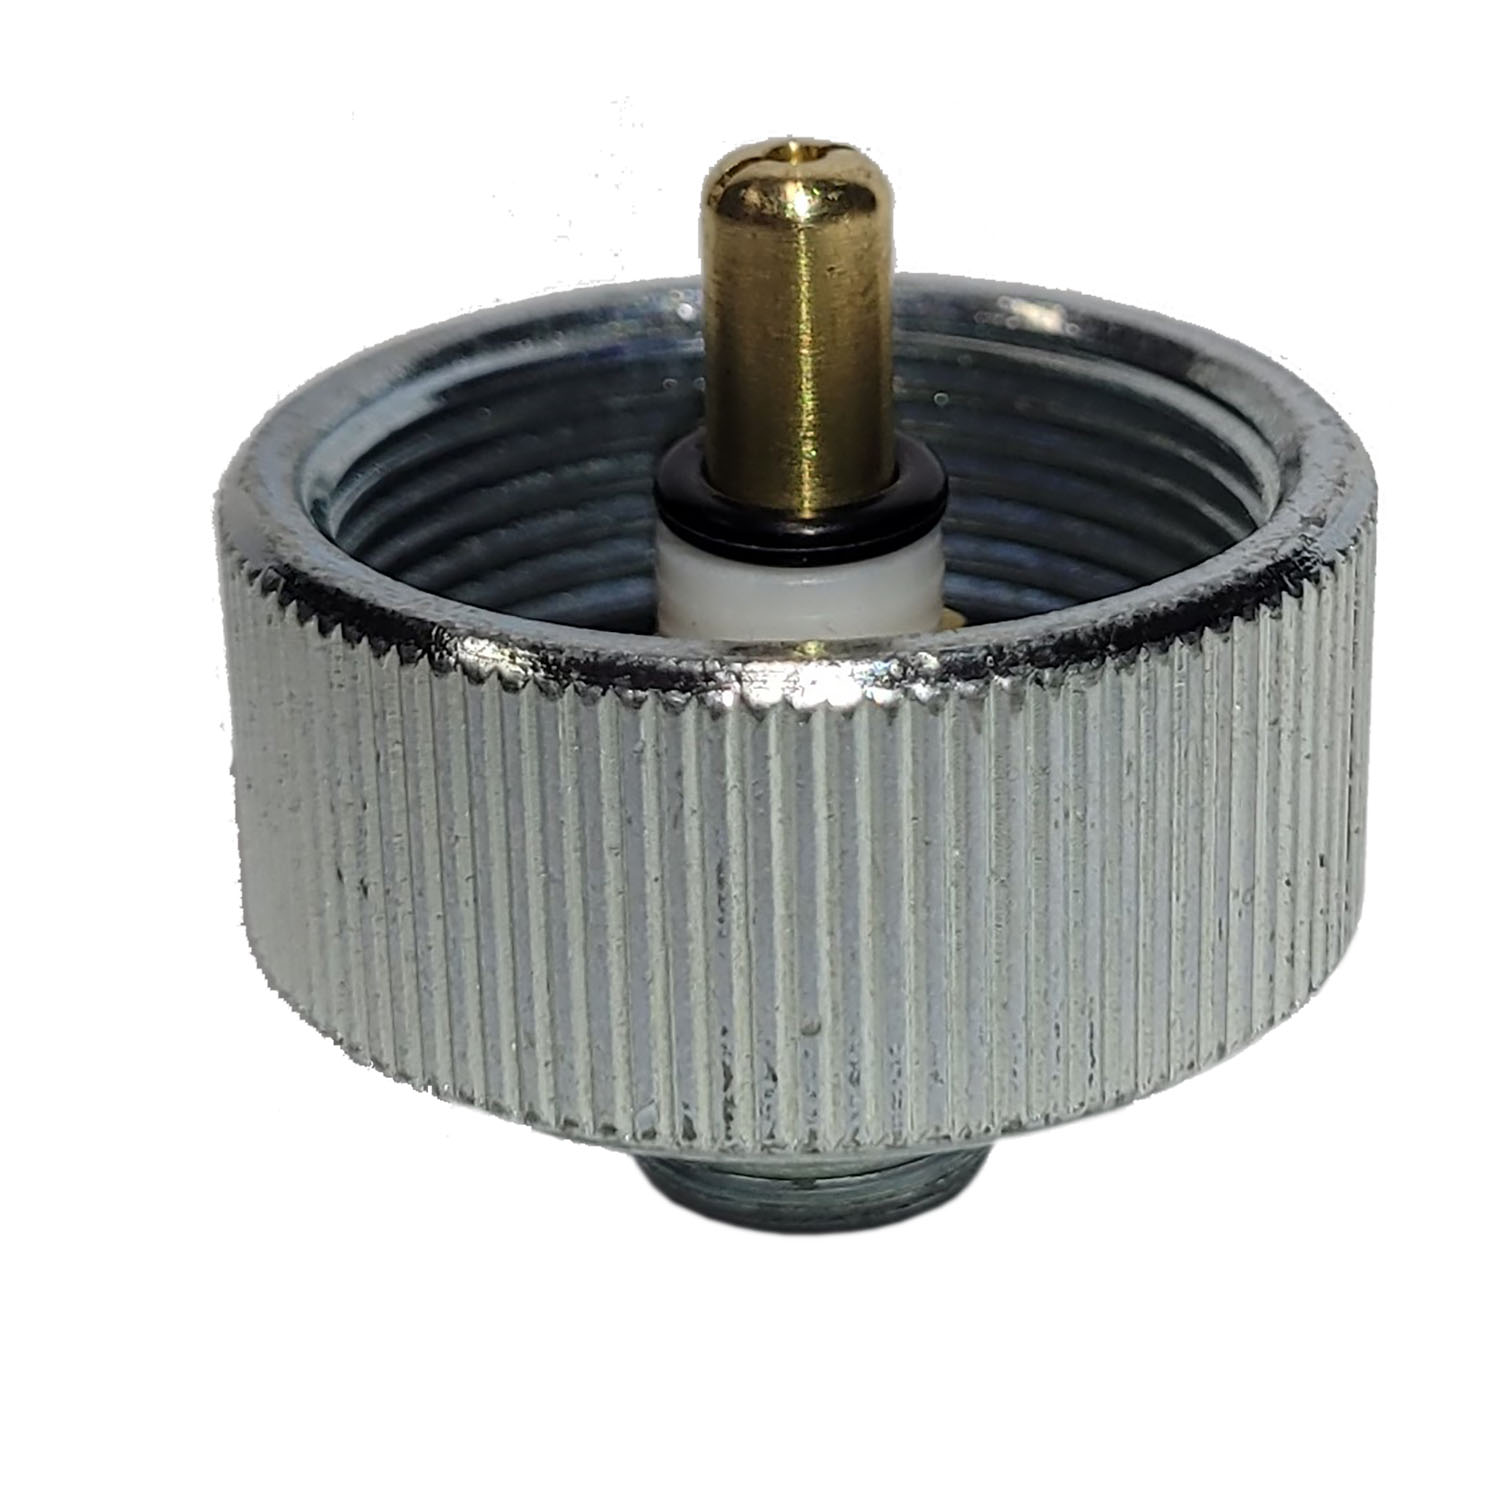 B-Adaptor - Adaptor for B-Torch from USA CGA 600 thread (outlet on cylinder) to  EU 7/16 (adapter for B-Torch)